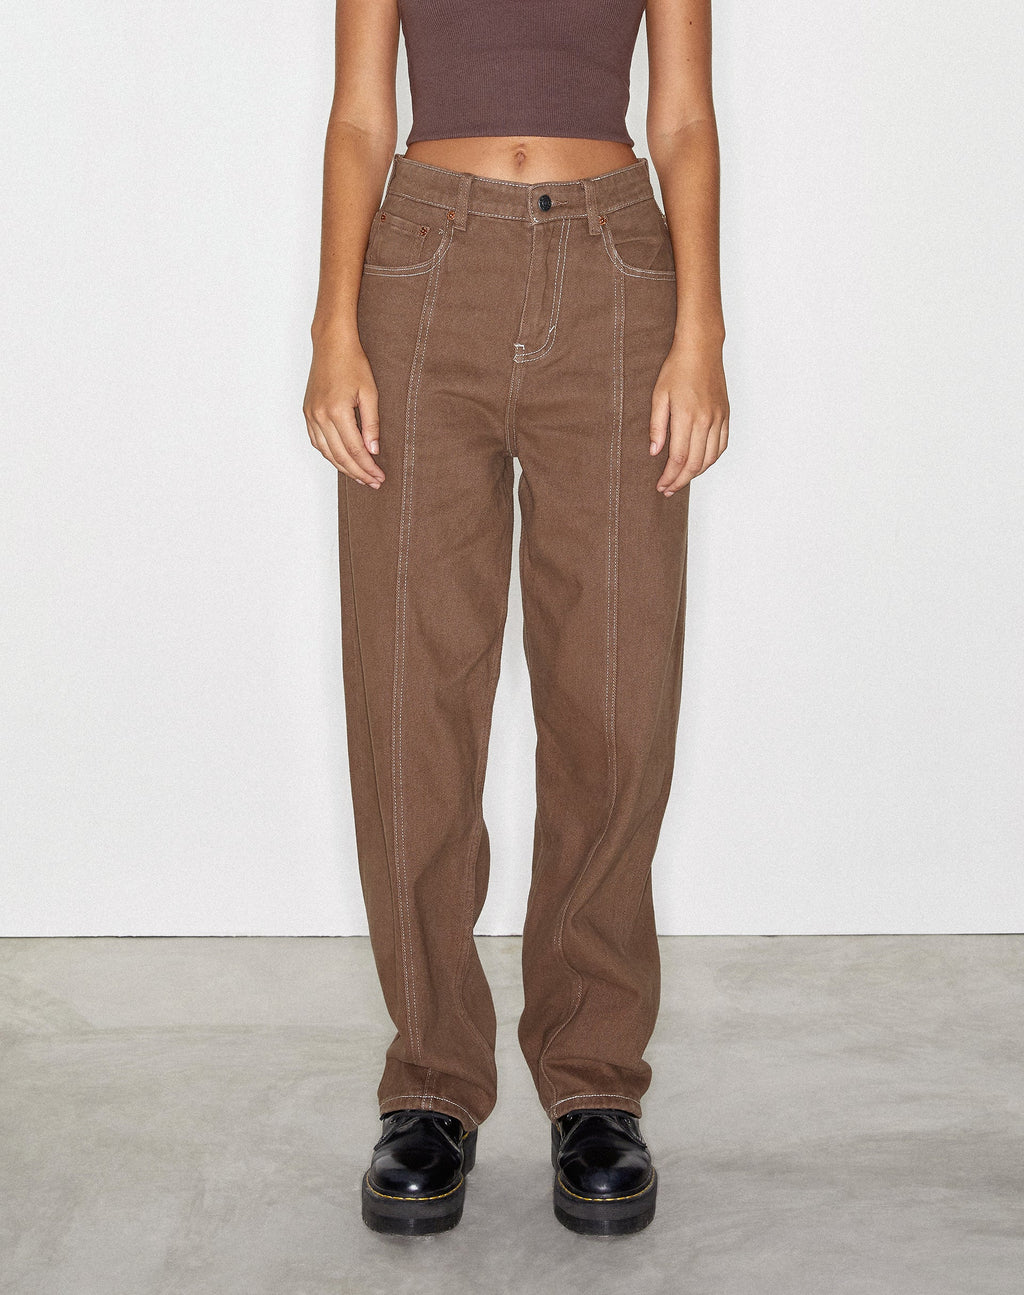 Seam Parallel Jeans in Rich Brown